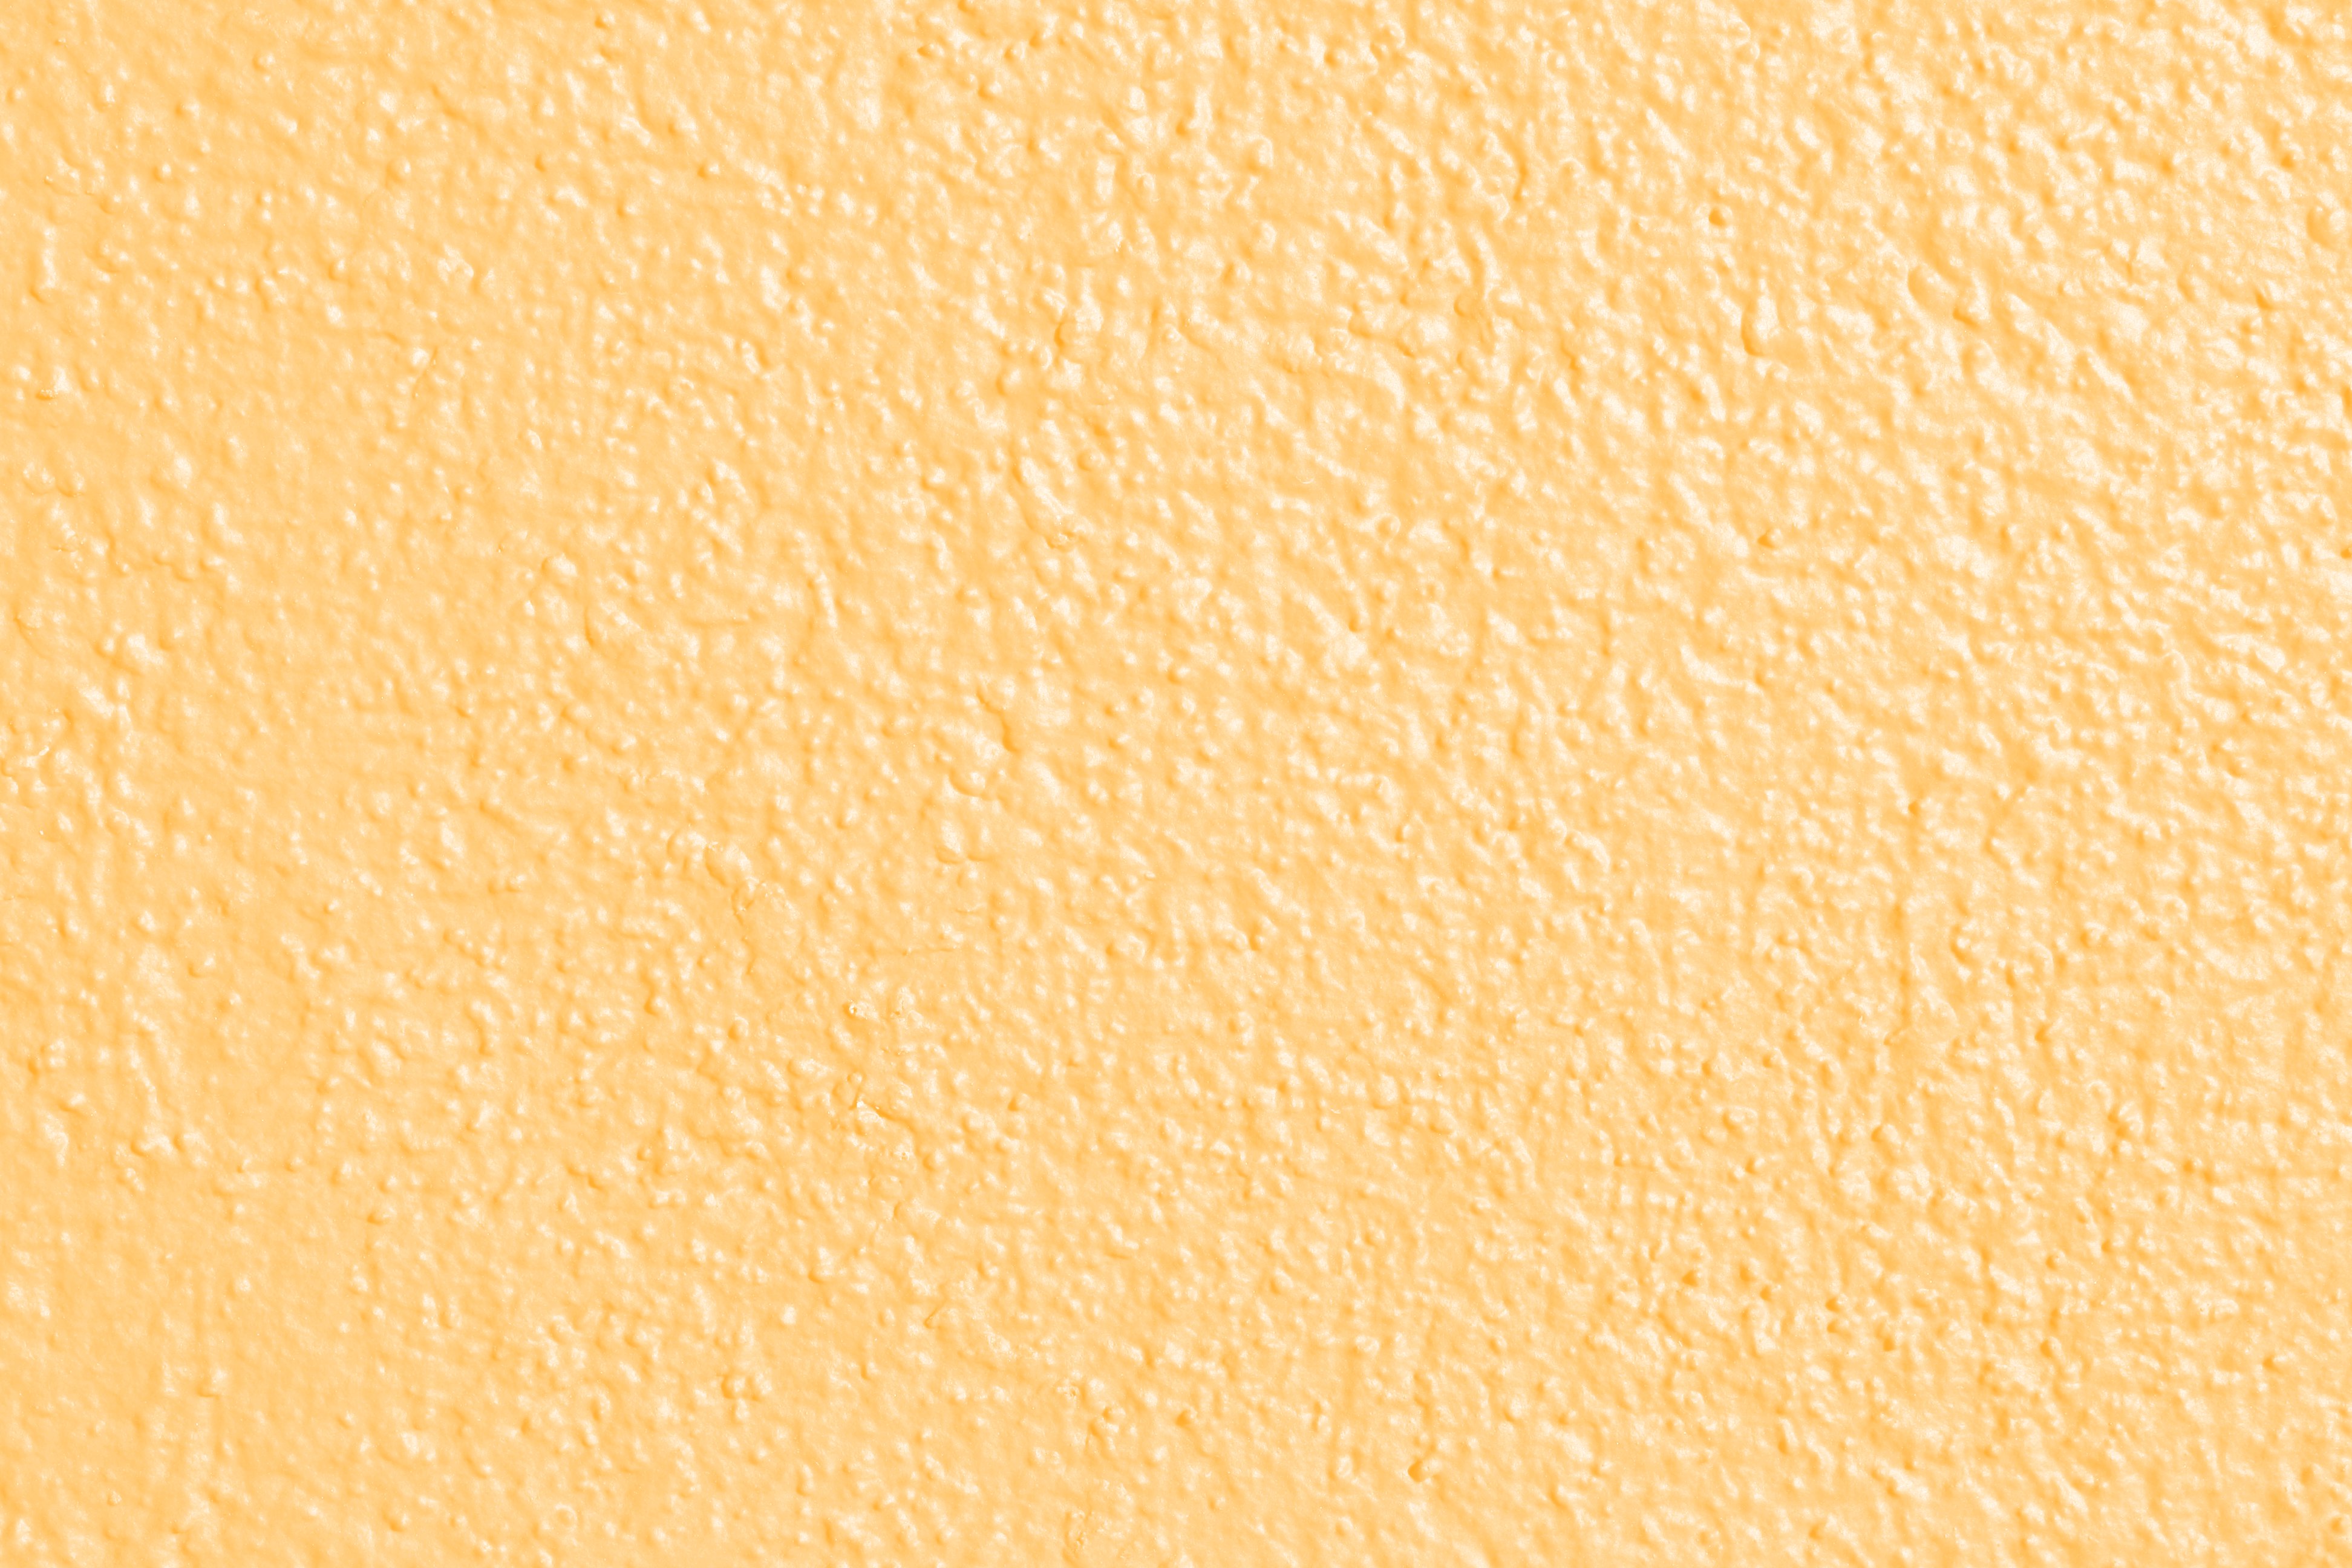 Peach Or Light Orange Colored Painted Wall Texture Picture